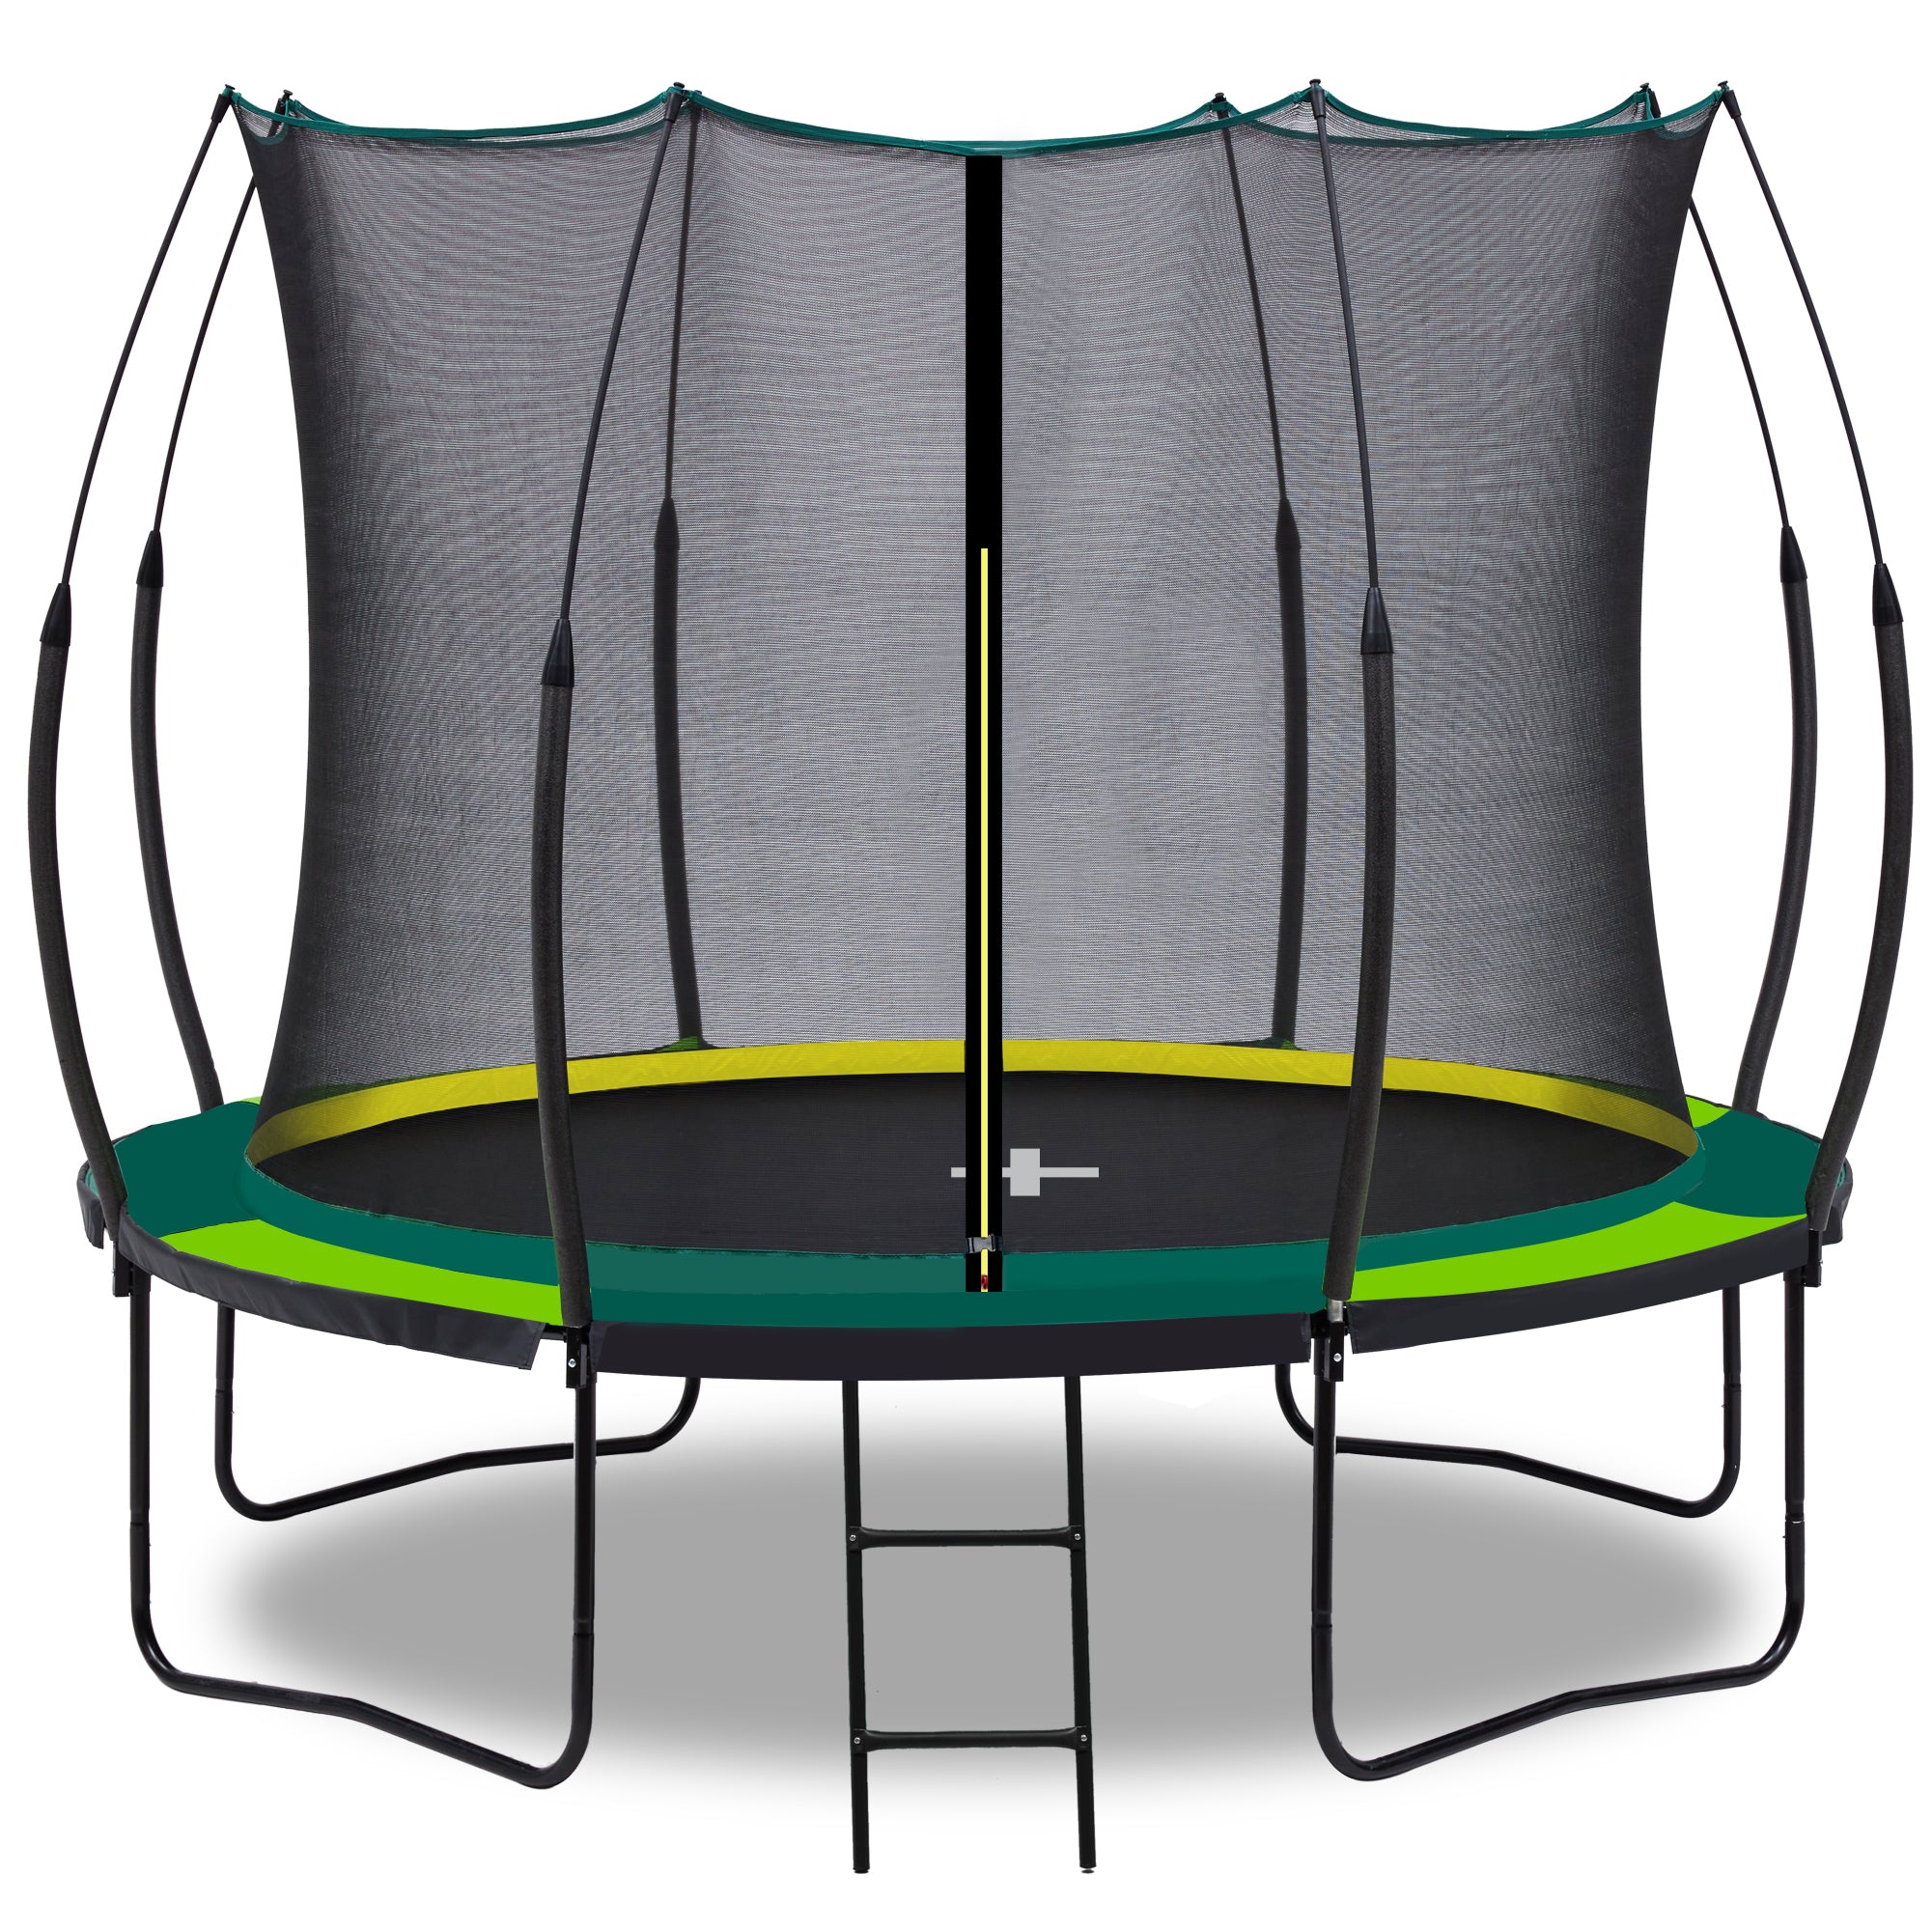 YC 10FT Recreational Trampolines with Enclosure for green-steel